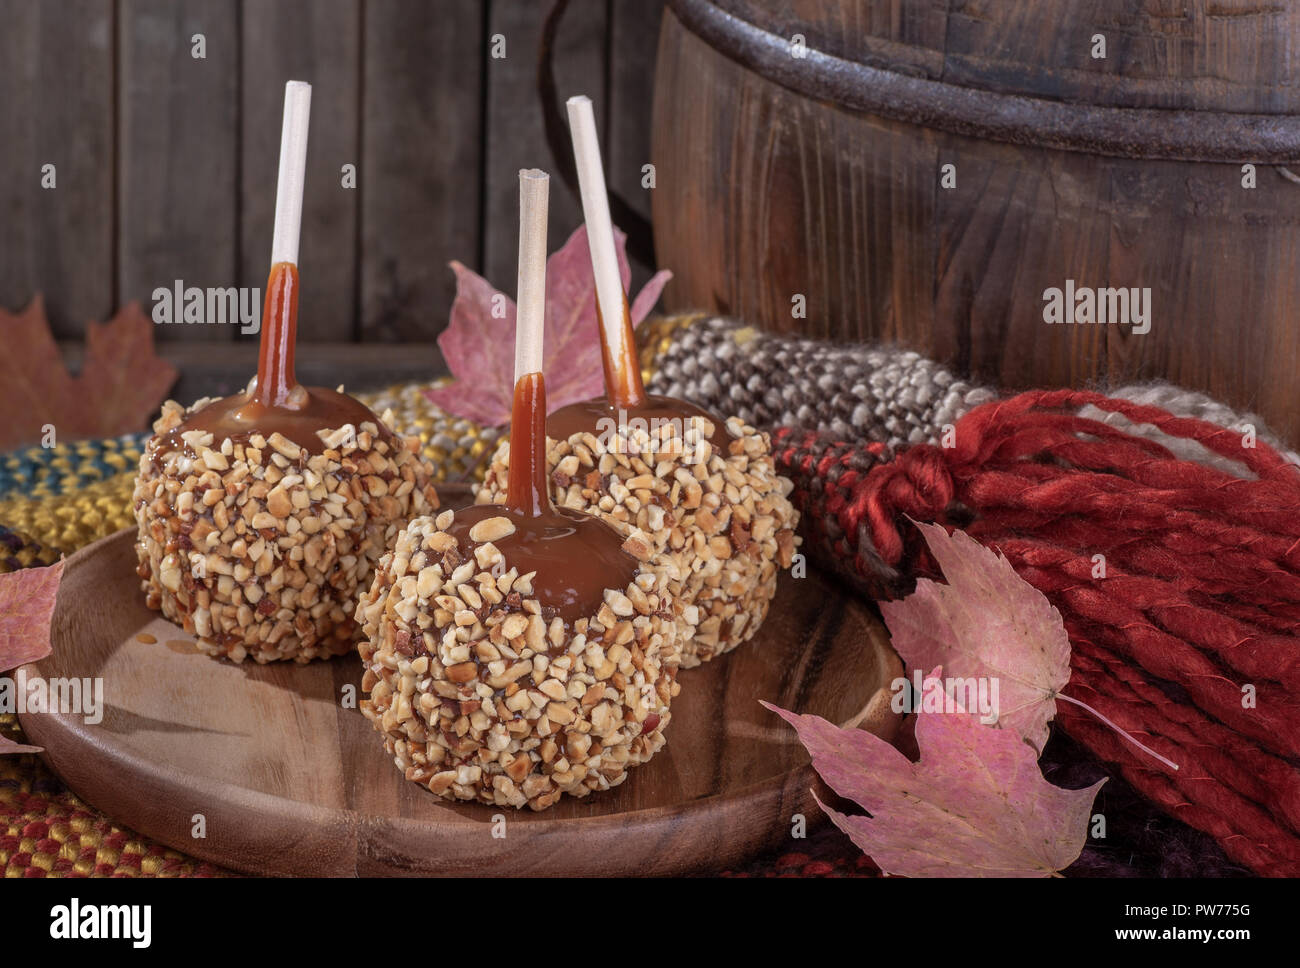 Taffy apples coated with nuts on a wooden plate in a rustic setting Stock Photo